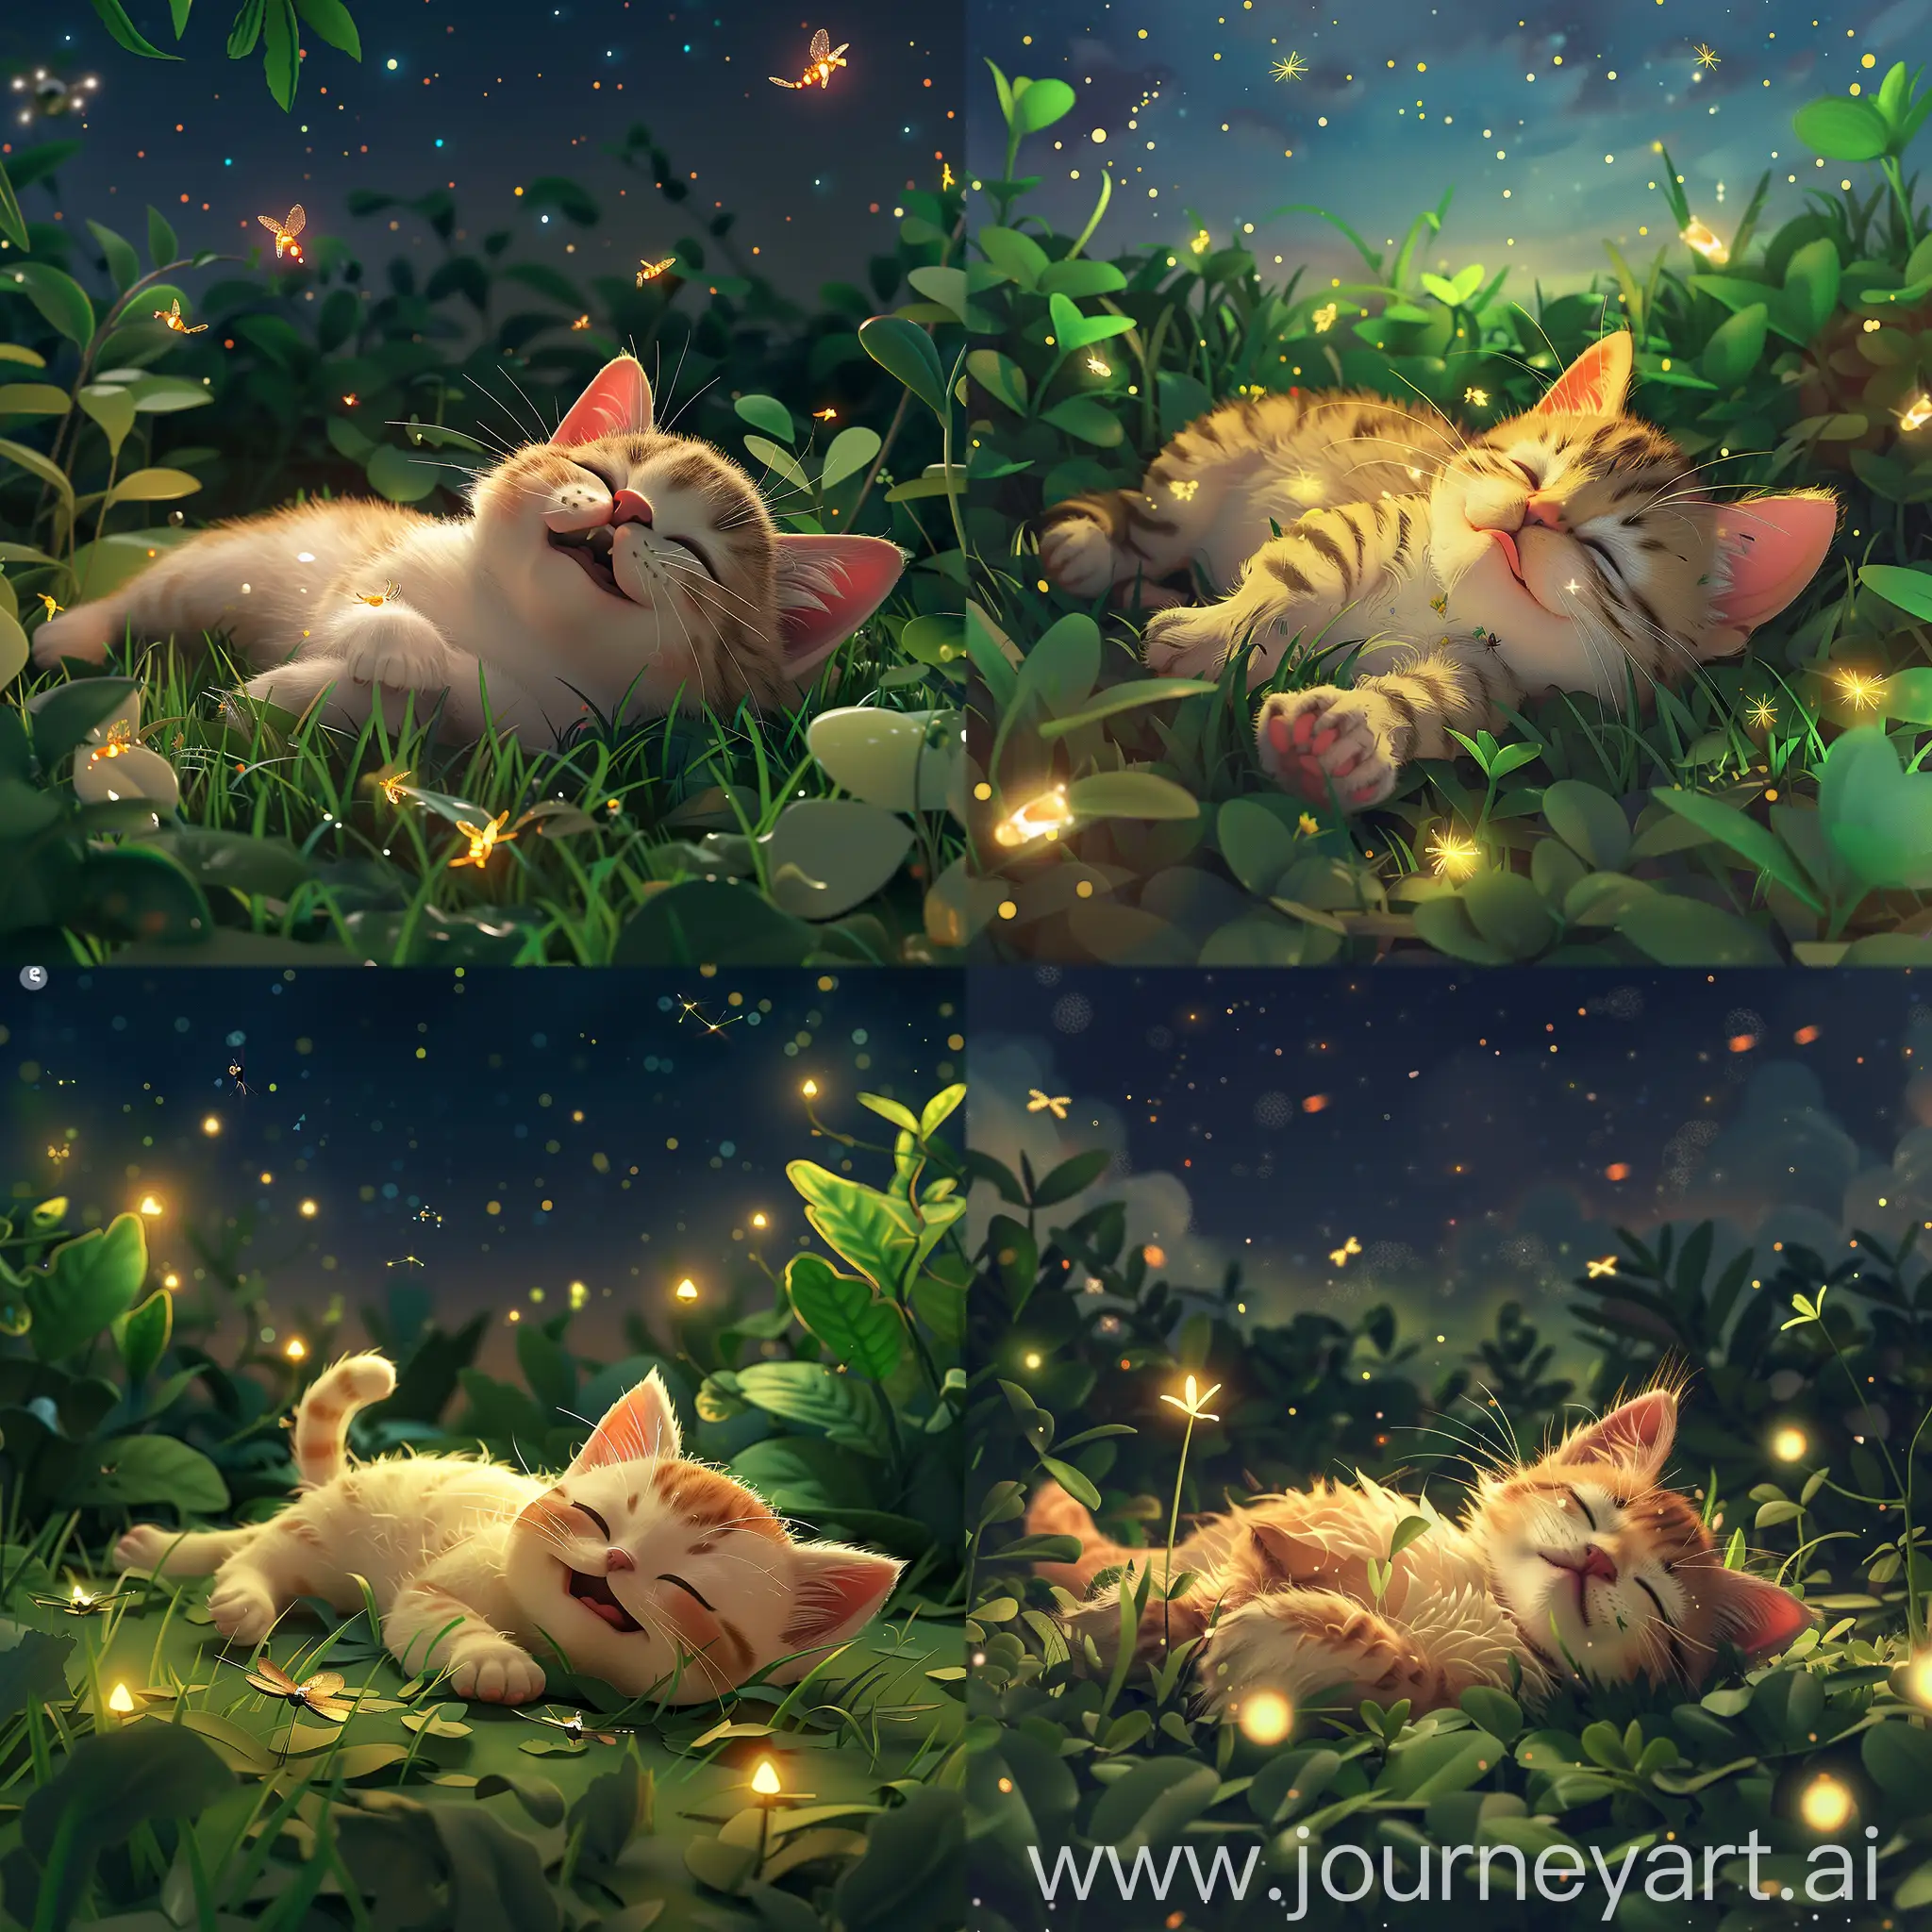 A cute little cat is sleeping on the grass, surrounded by fireflies and stars in the sky. The background features cartoon-style characters with soft lighting, creating an adorable atmosphere. This scene was created using C4D software, featuring high-definition rendering and a 32K resolution. It showcases the best quality of animation artistry. A detailed illustration of a chubby kitten lying down, with closed eyes and mouth open, surrounded by green plants under starry night skies in the style of animation artistry.